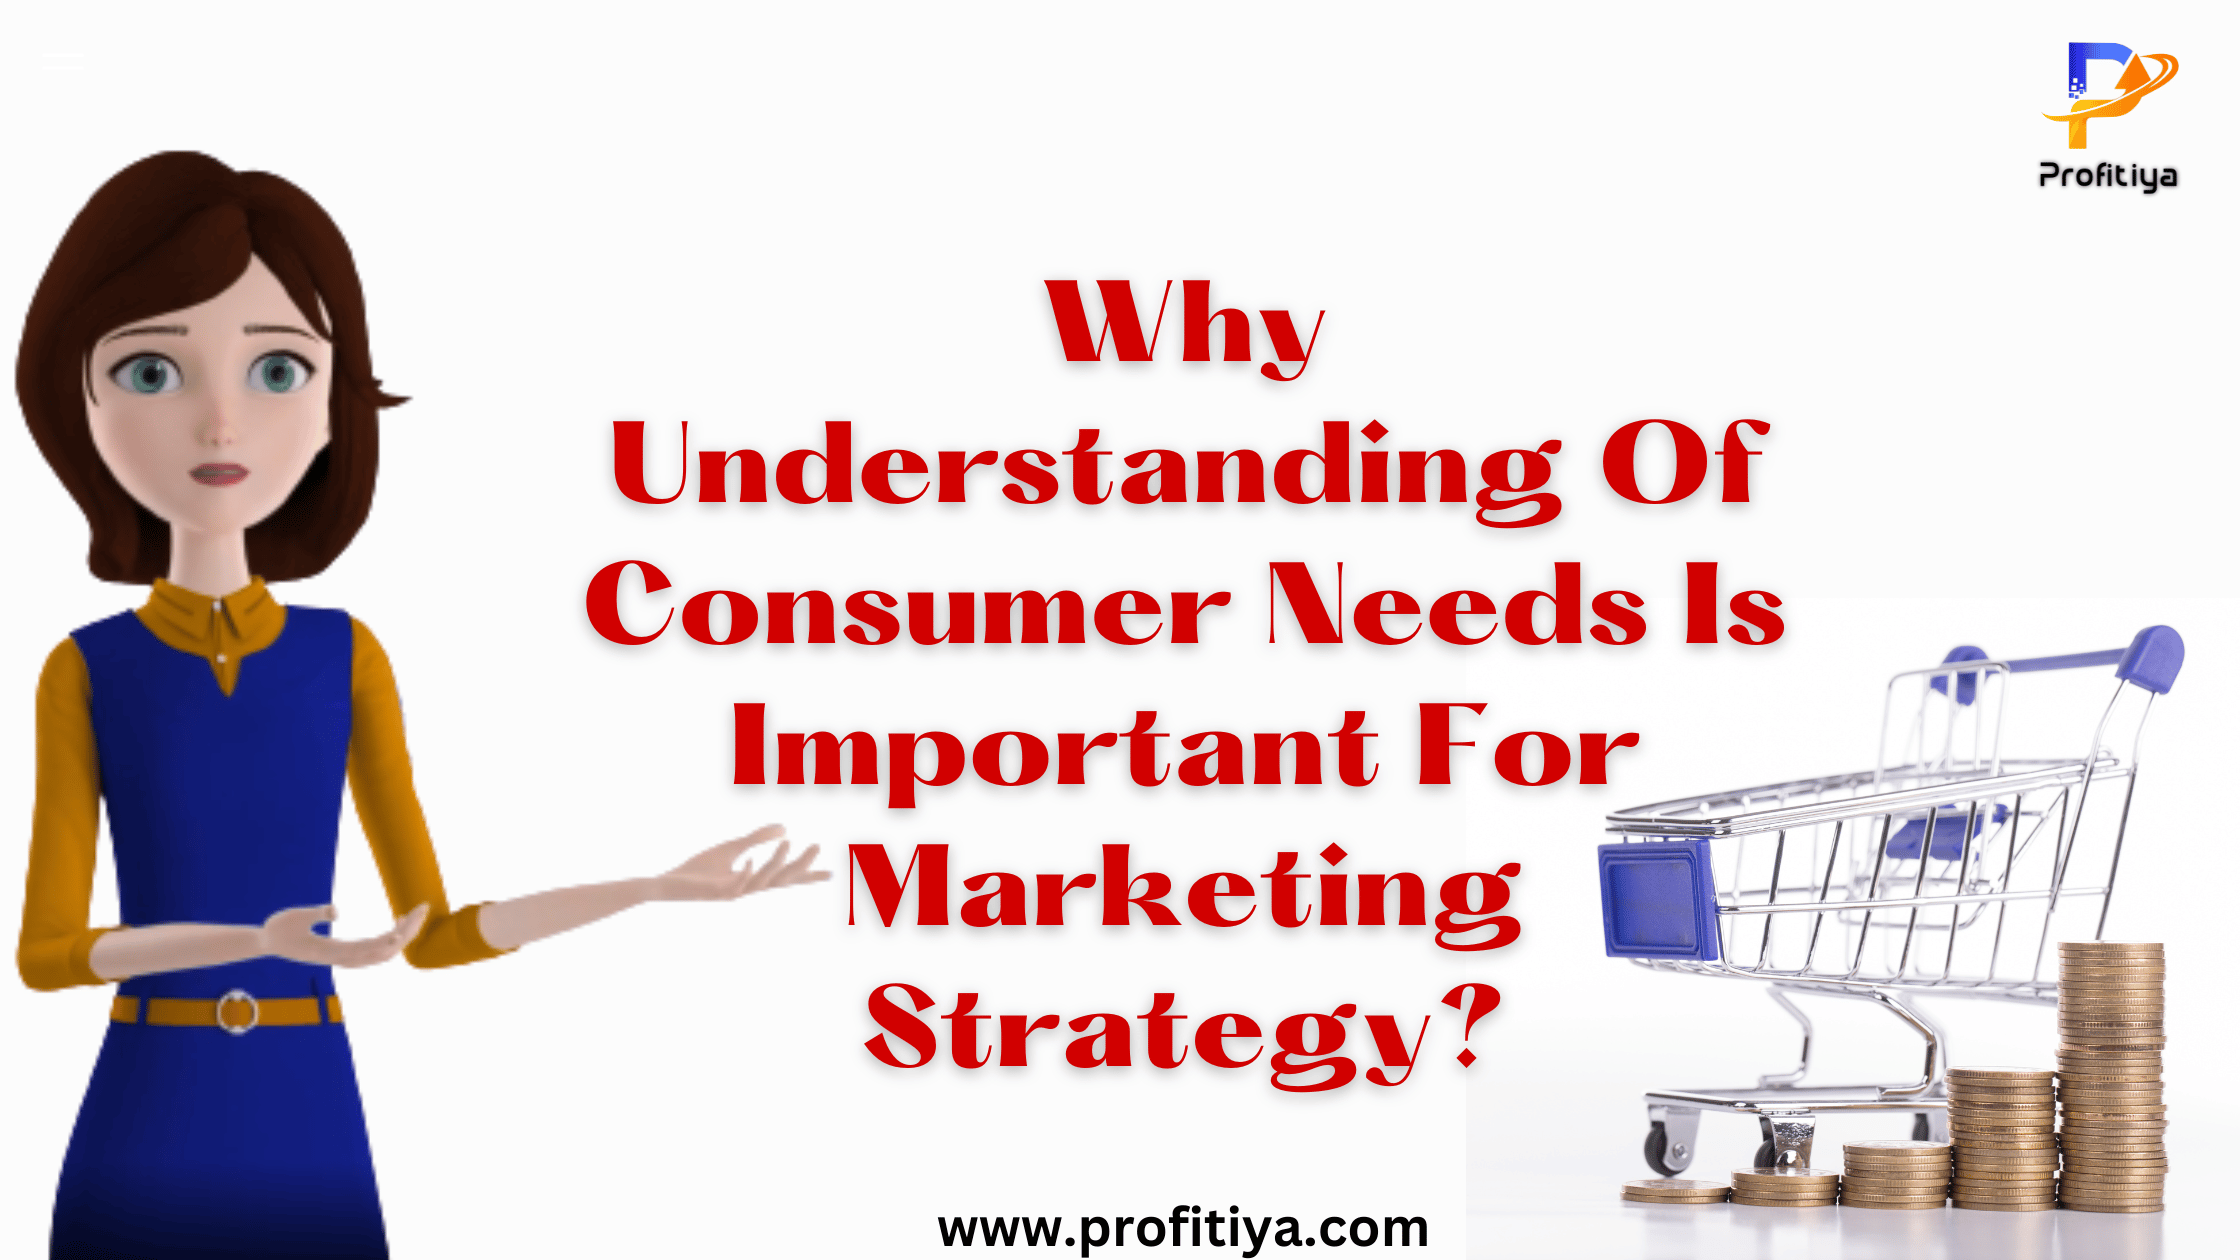 Why Understanding Of Consumer Needs Is Important For Marketing Strategy?